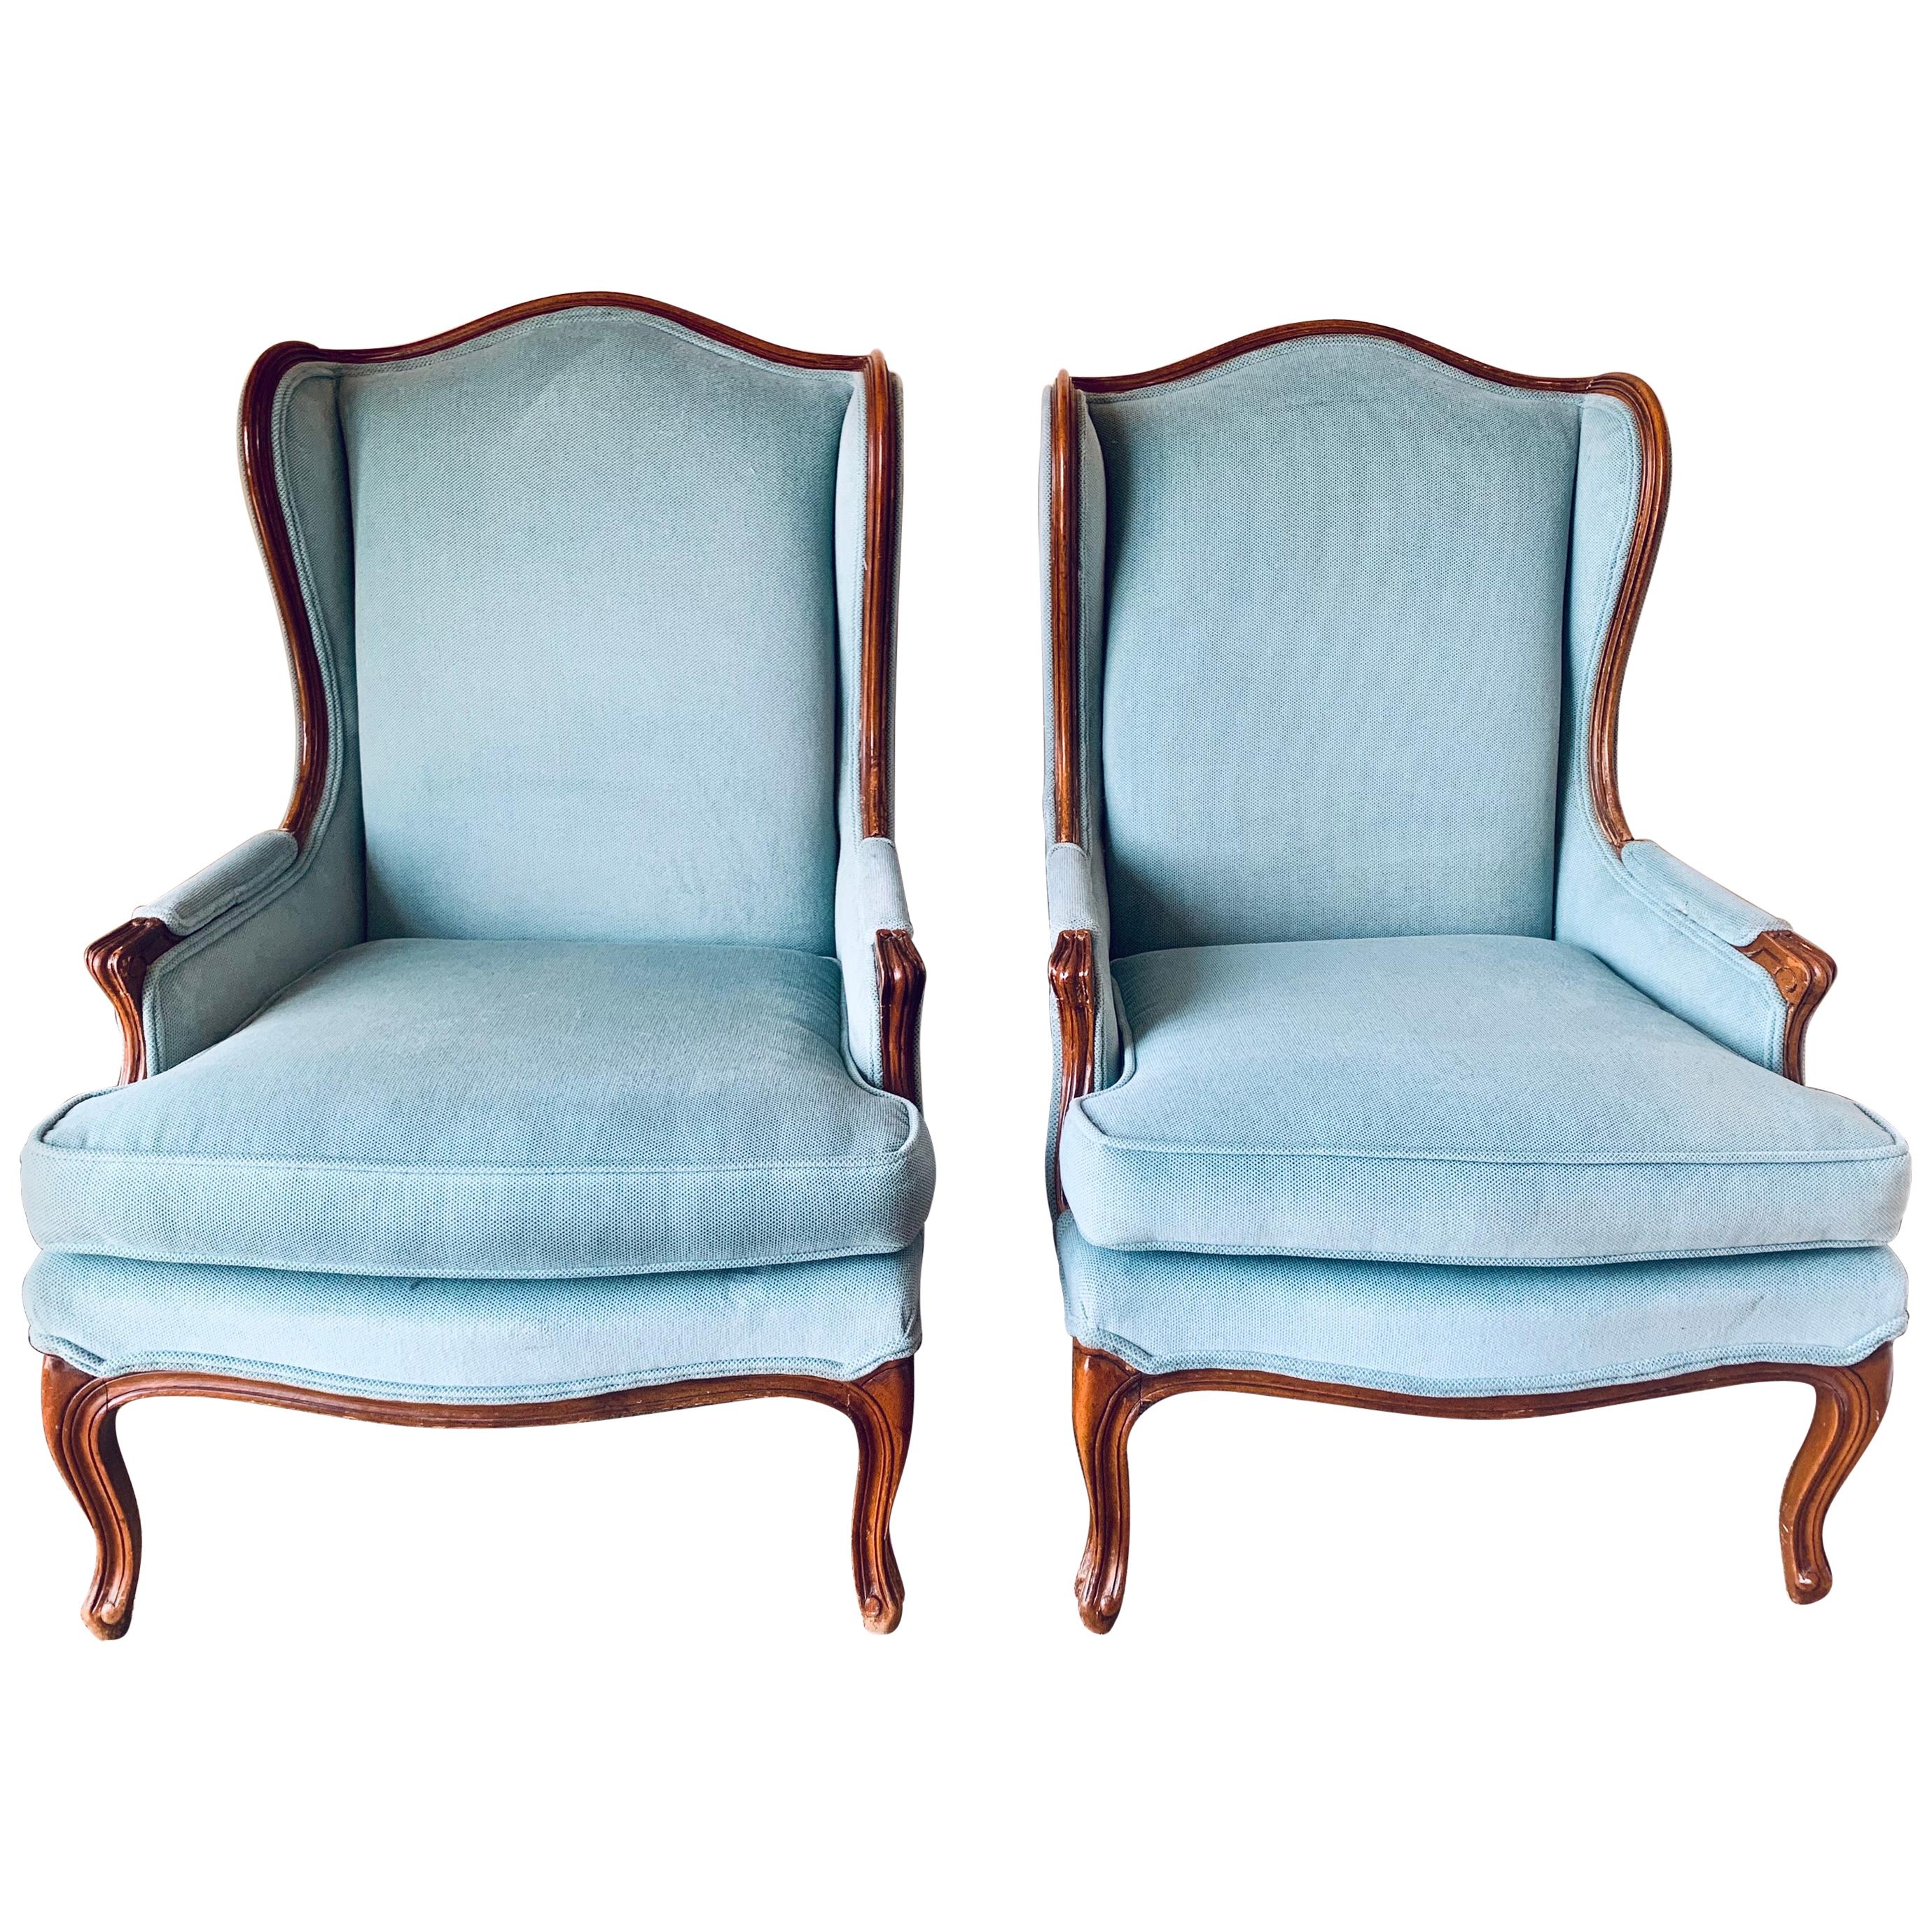 Pair of French Louis XV Blue Upholstered Carved Wingback Chairs